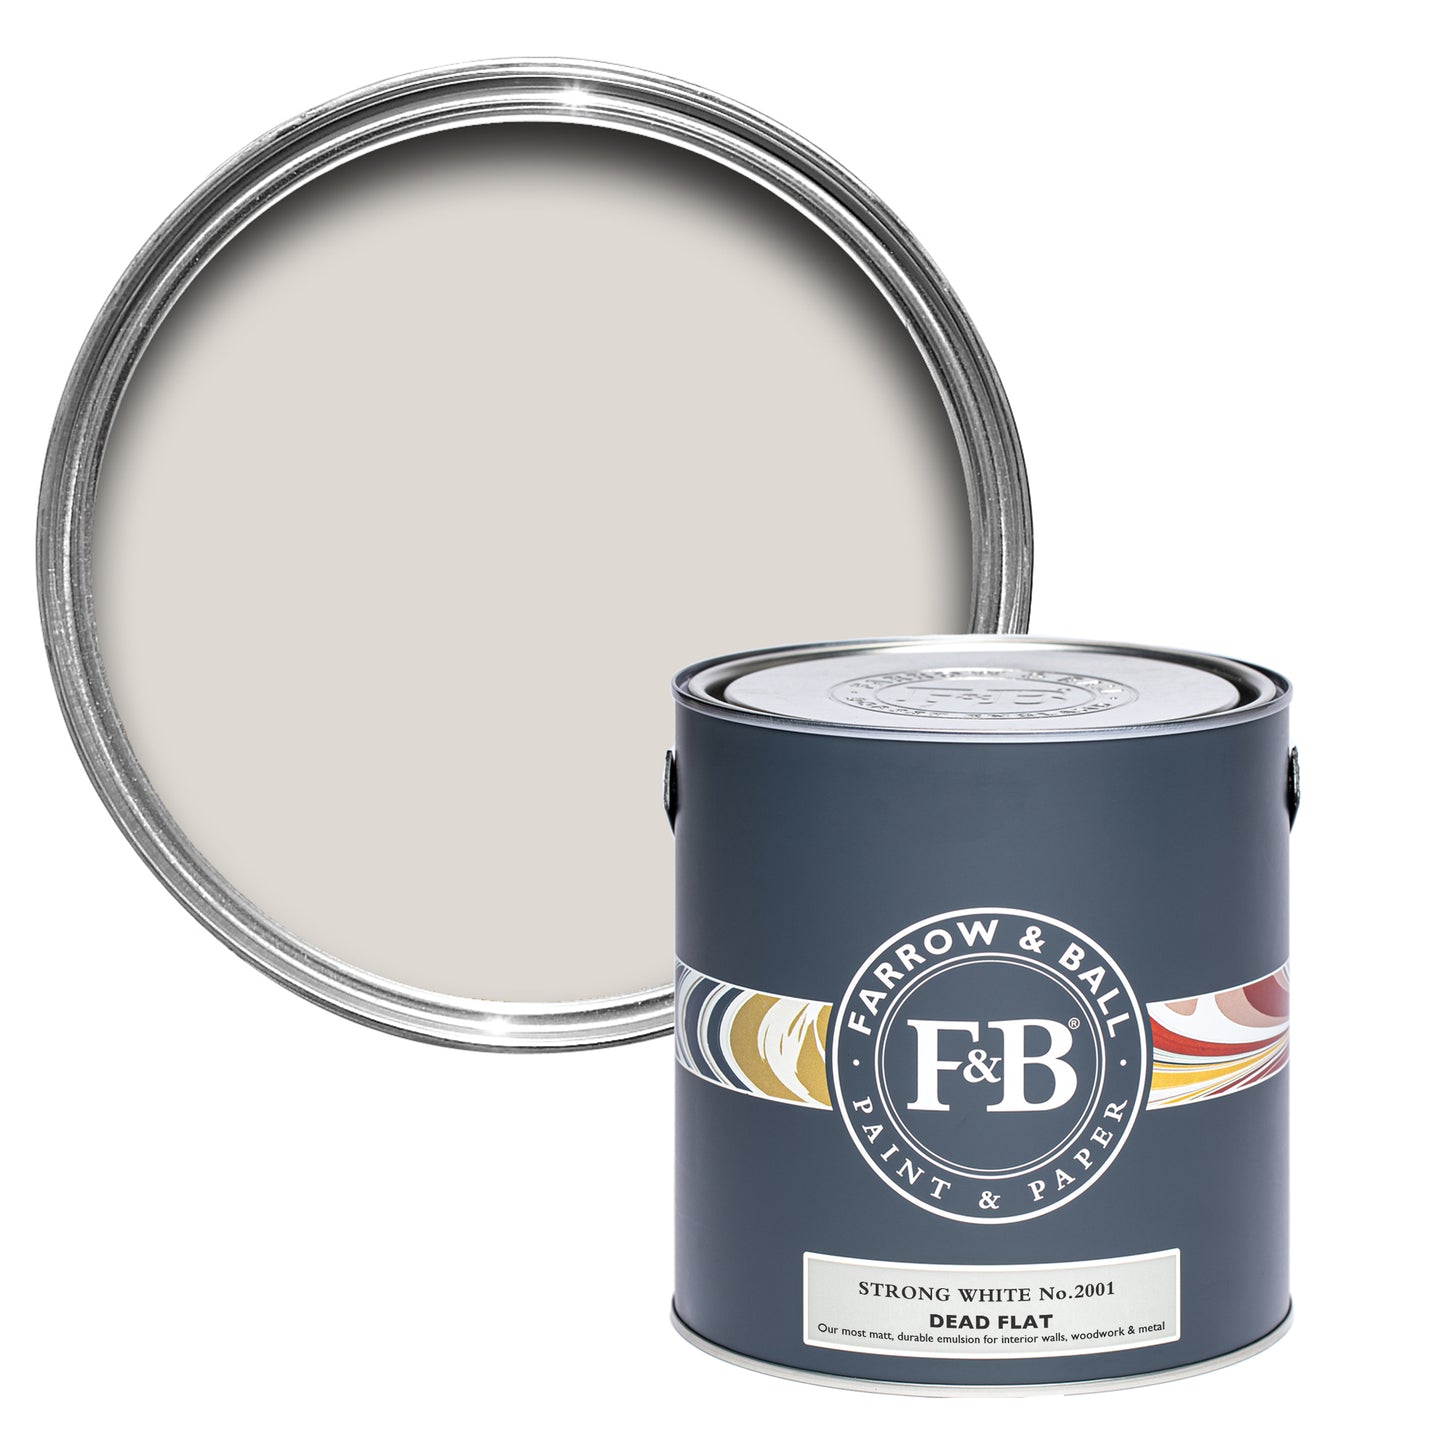 Dead Flat - Farrow and Ball - Strong White 2001 - Allround